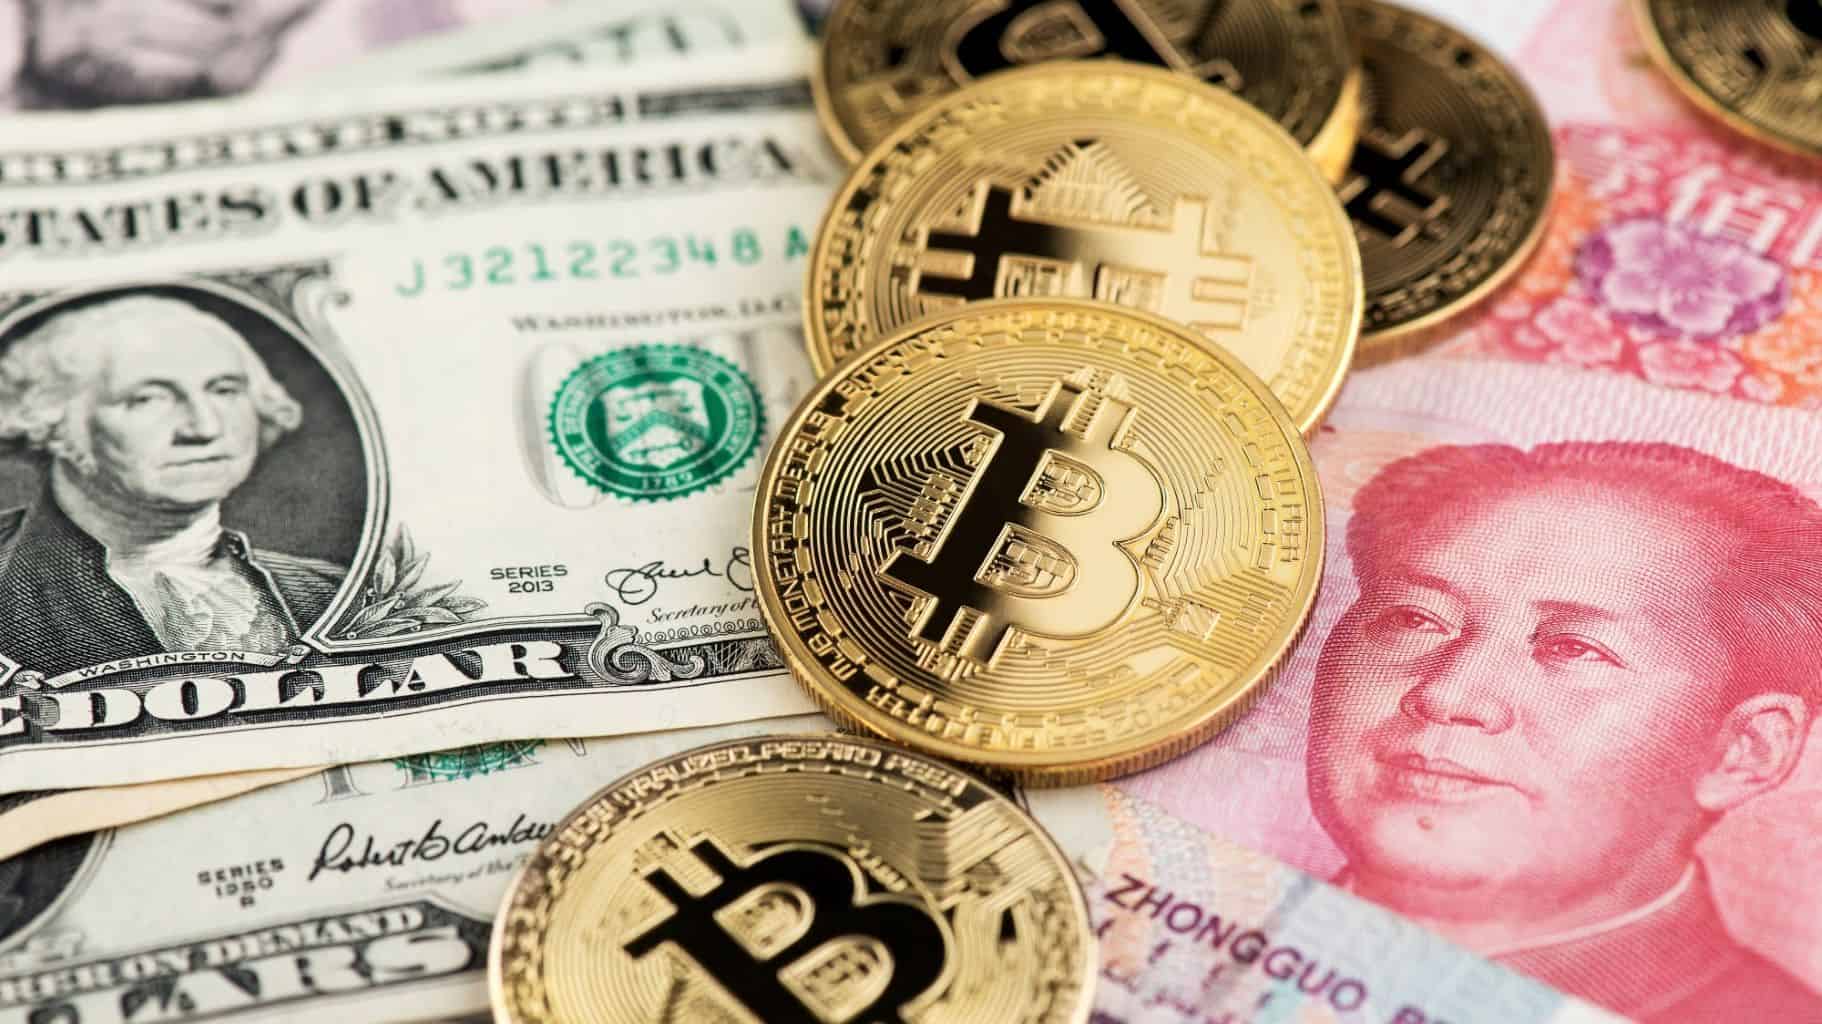 Paypal-ceo-says-bitcoin-could-be-a-chinese-financial-weapon-against-the-us.